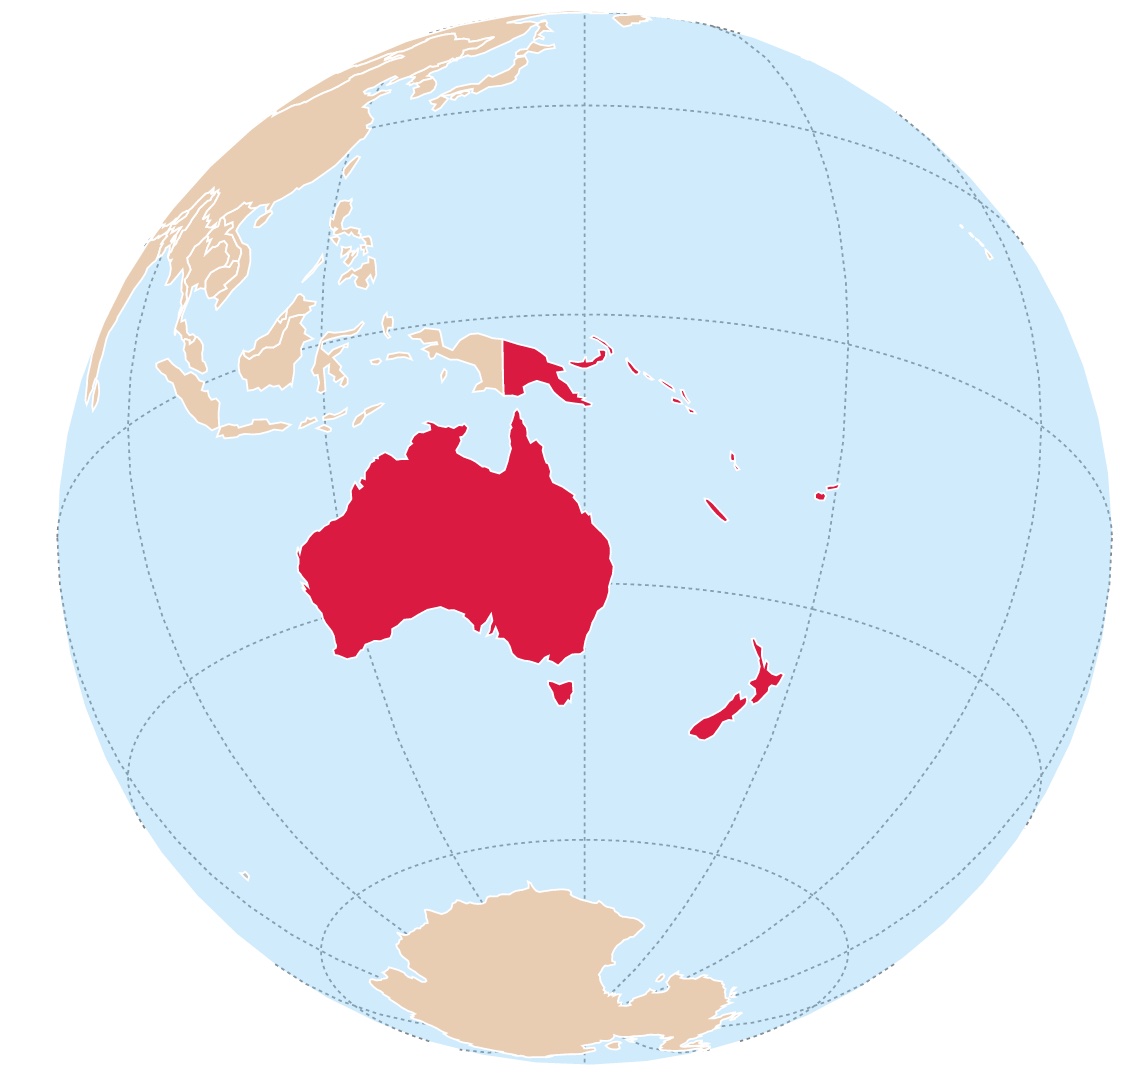 Australia and Oceania location on a map